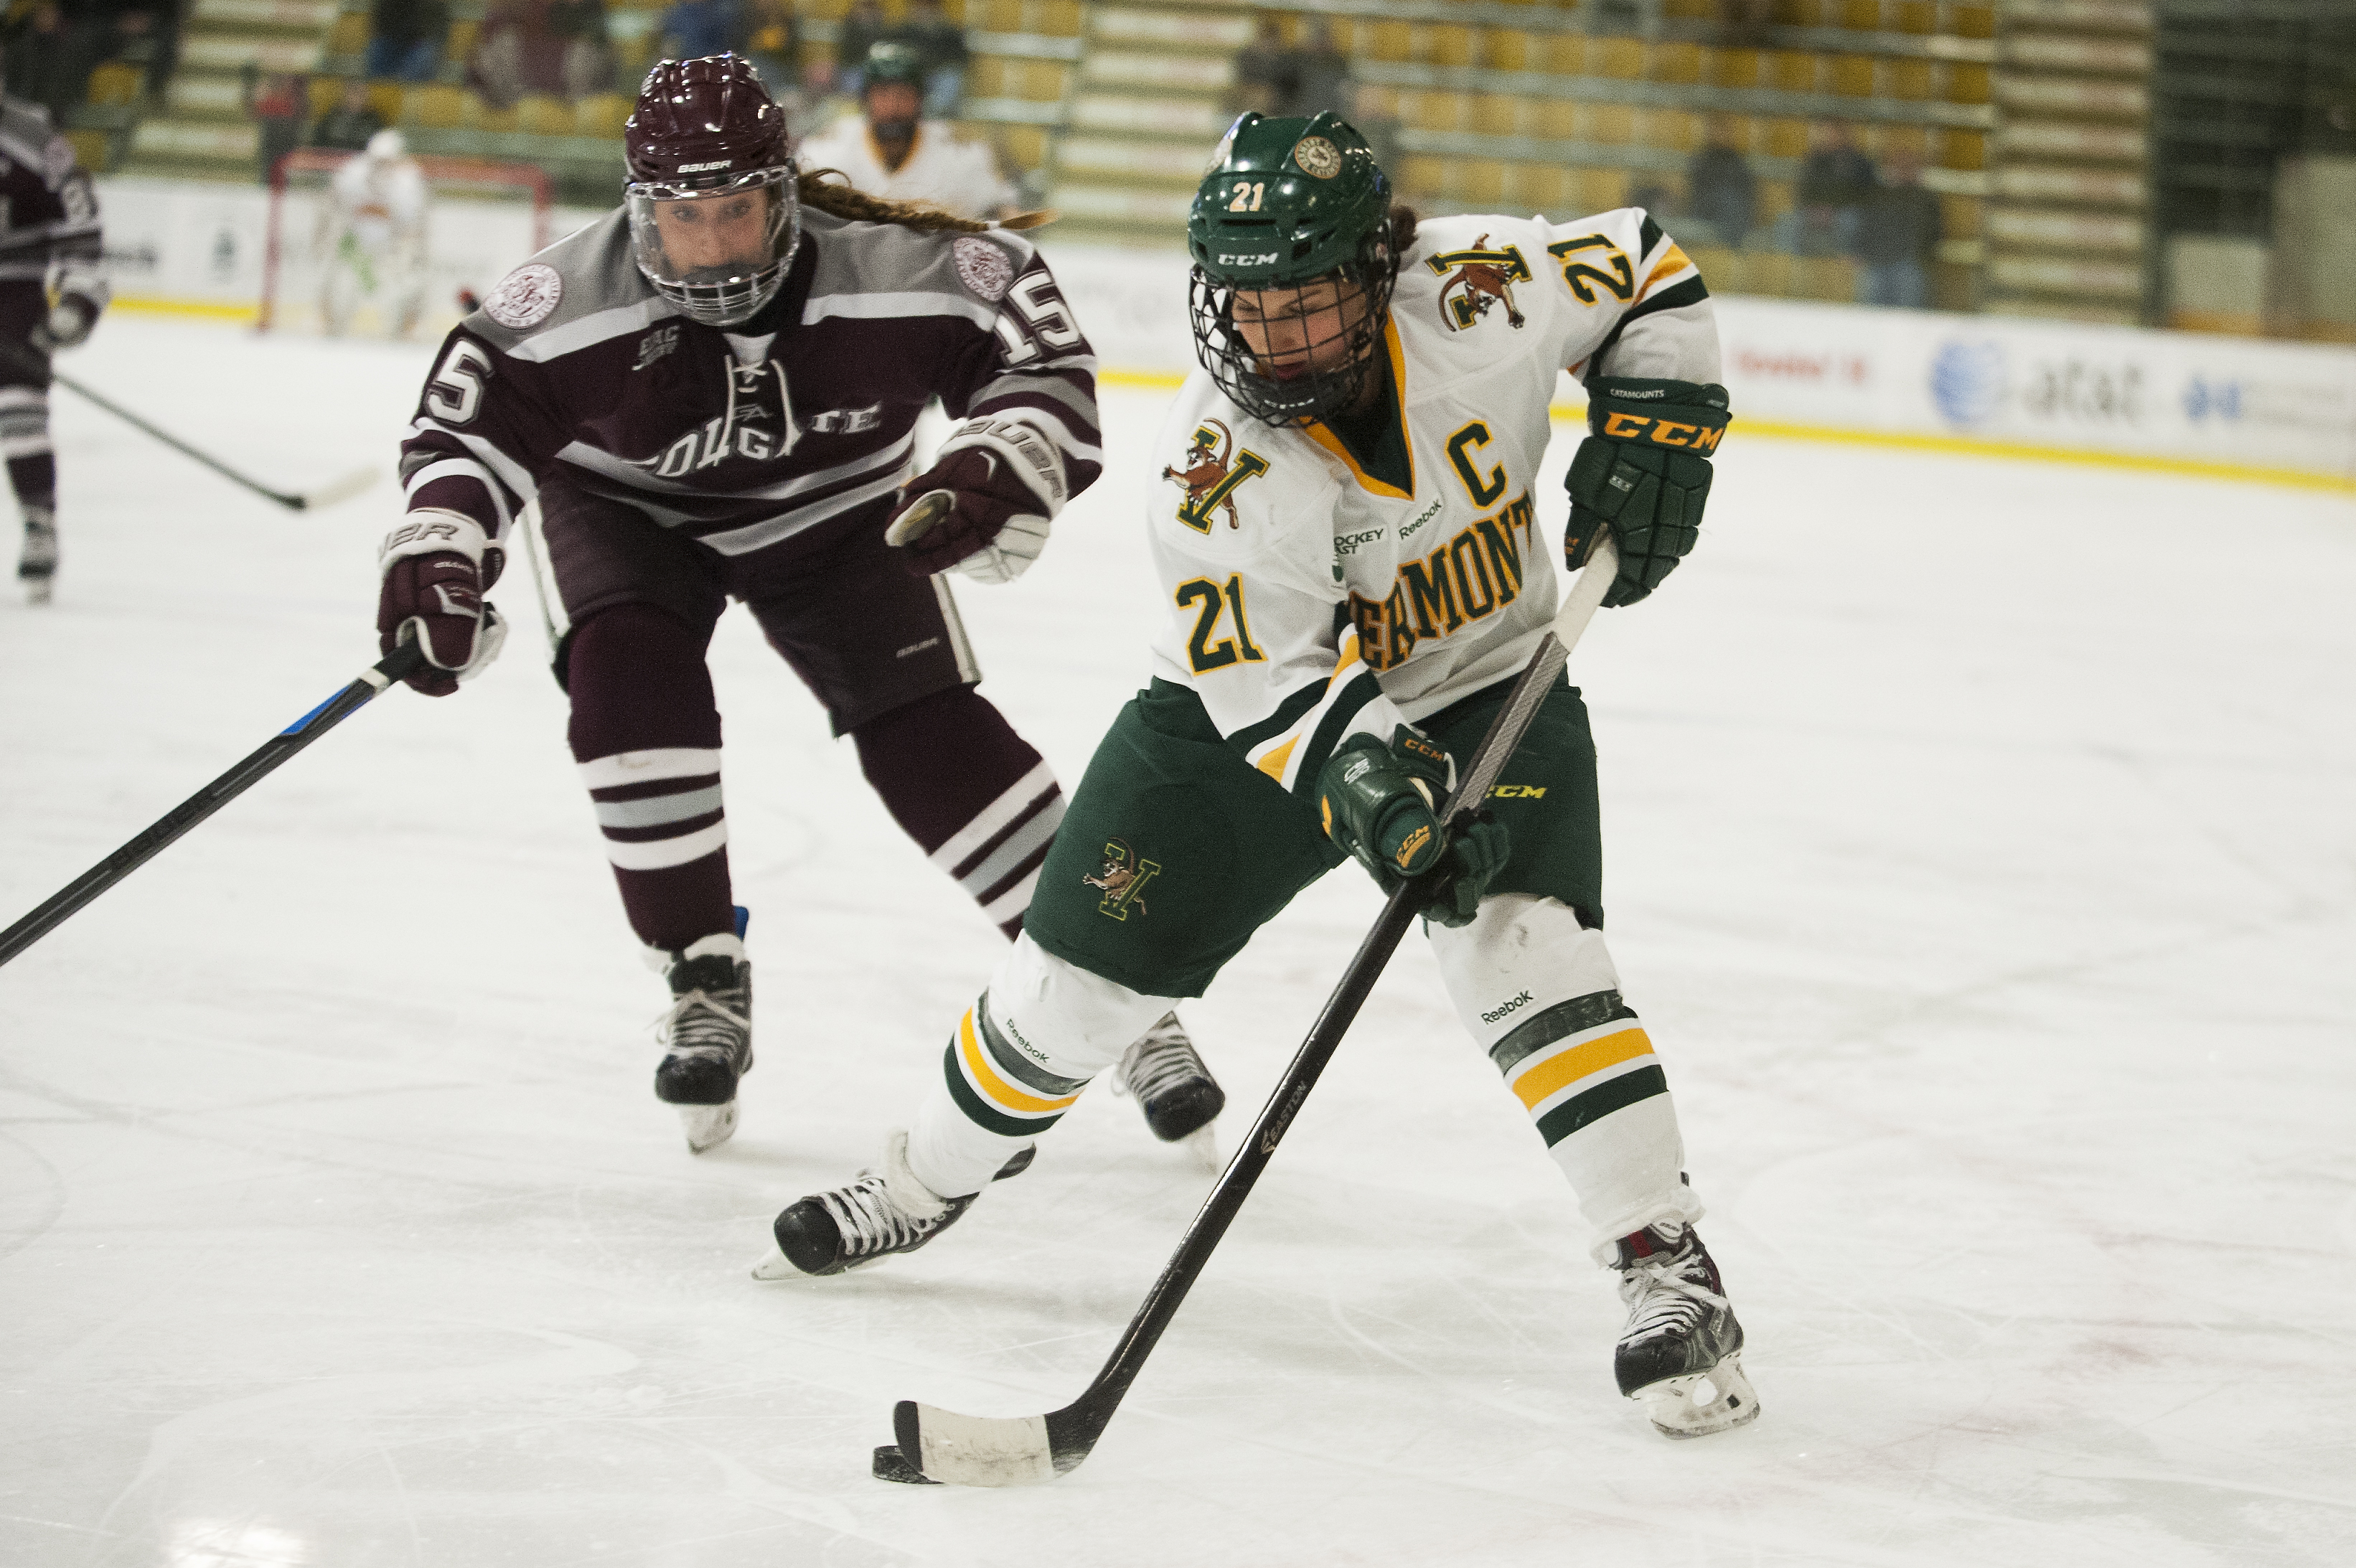 amanda pelkey, vt.'s most talented hockey player, ends college